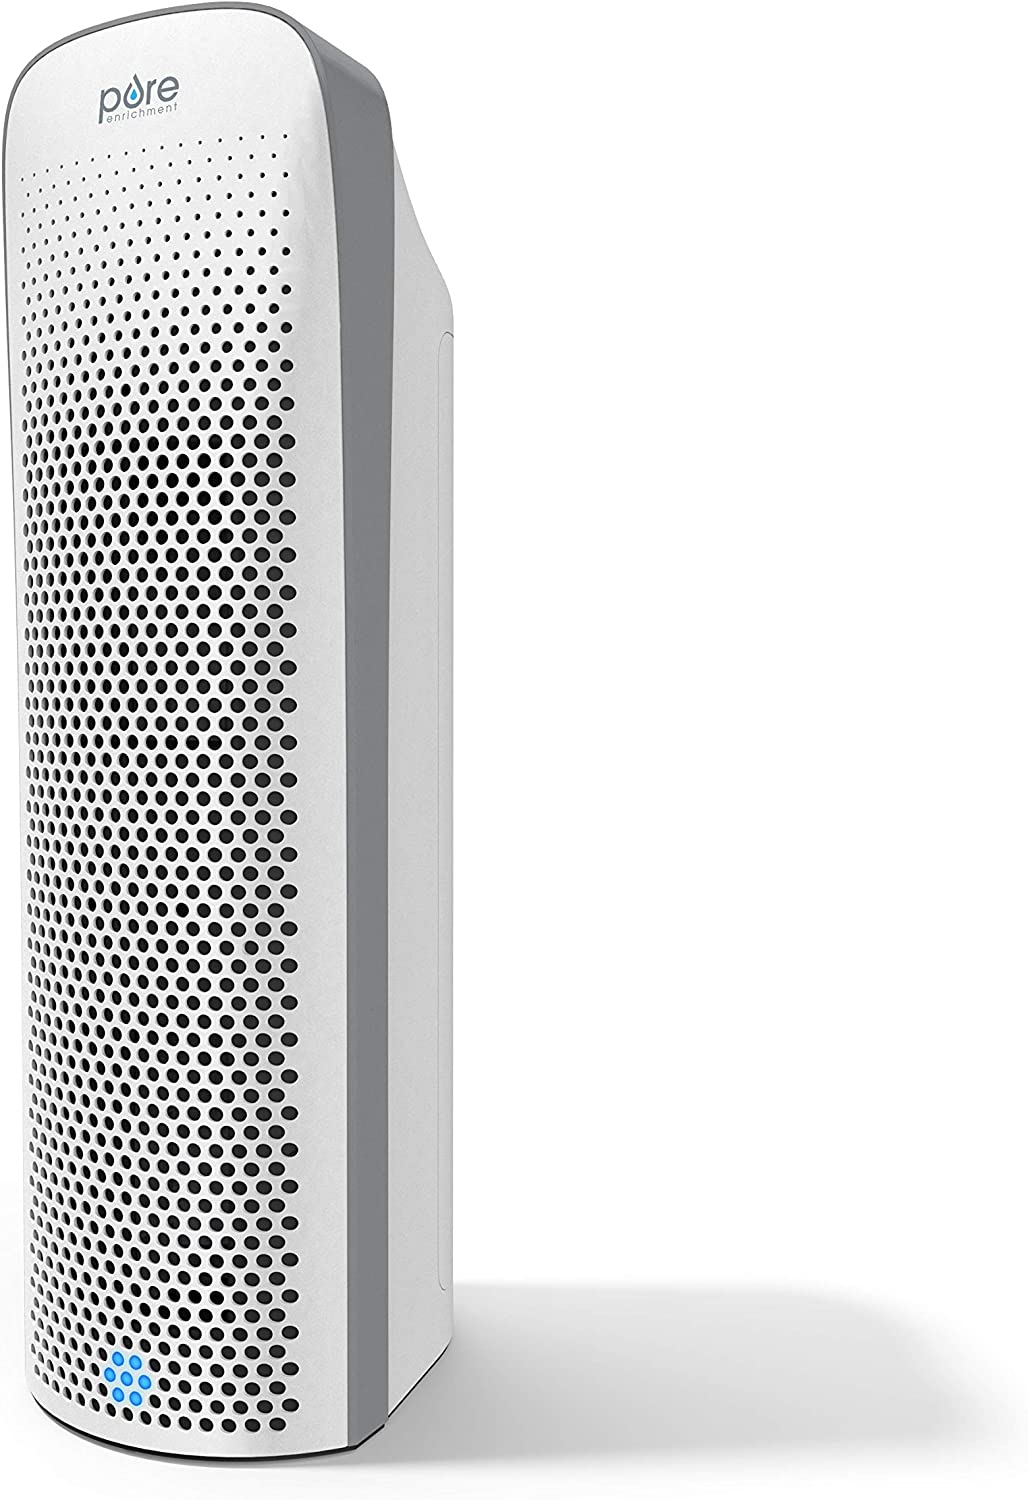 Pure Enrichment PureZone Elite True HEPA Large Room Tower Air Purifier with Air Quality Monitor, 4 Stage Filtration and UV-C Light, Helps Destroy Bacteria, Smoke, Pollen & Dust - White - Pro-Distributing